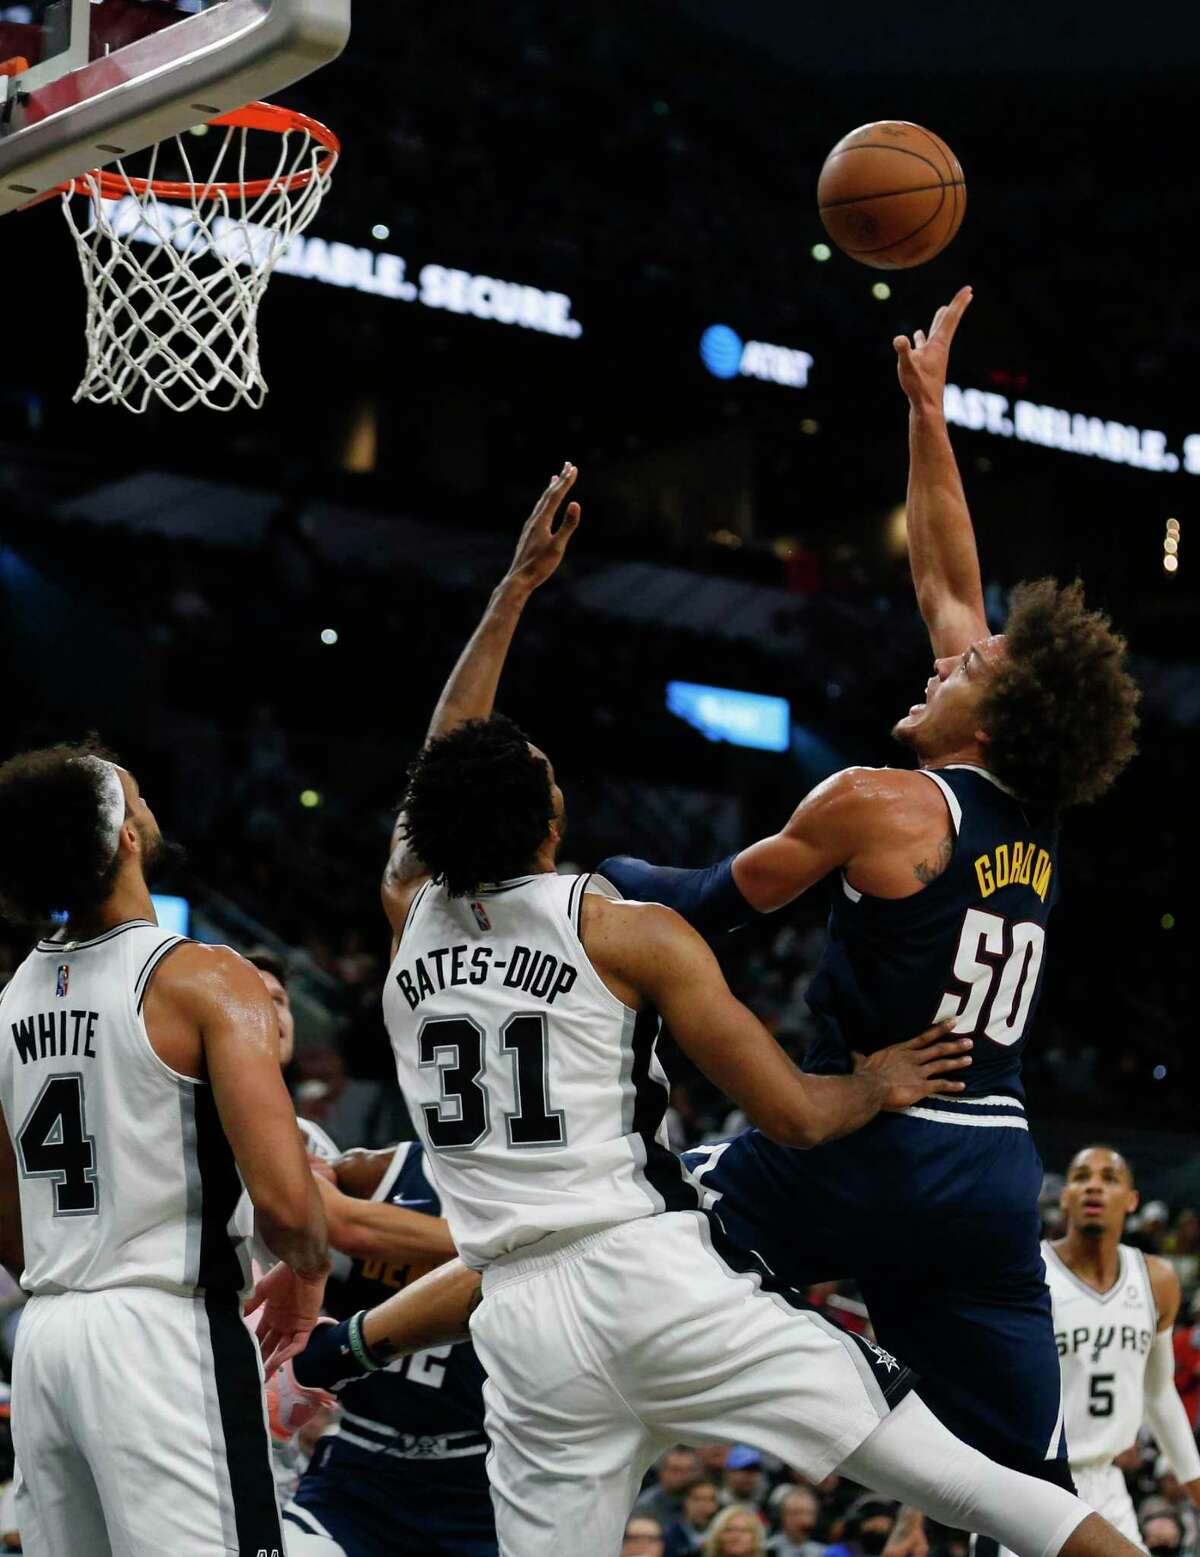 Denver Nuggets forward Aaron Gordon (50) shoots over San Antonio Spurs forward Keita Bates-Diop (31) and guard Derrick White (4) at AT&T Center in San Antonio, Texas, Thursday, Dec. 9, 2021. The Spurs defeated the Nuggets, 123-111.